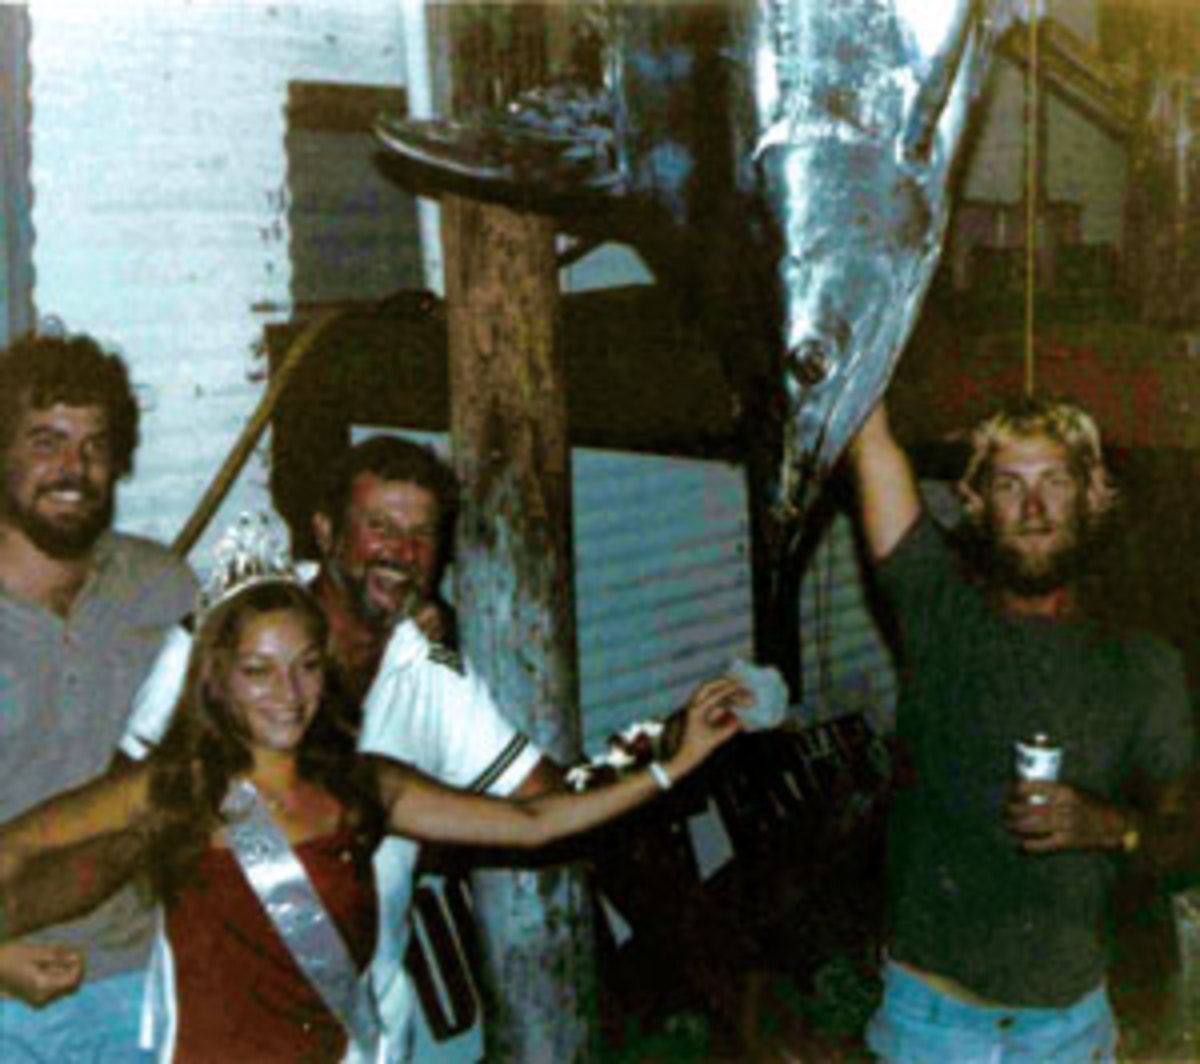 Michael Peters (left) and Harold Halter (center) at the Grand Isle Fishing Tournament, 1978. 